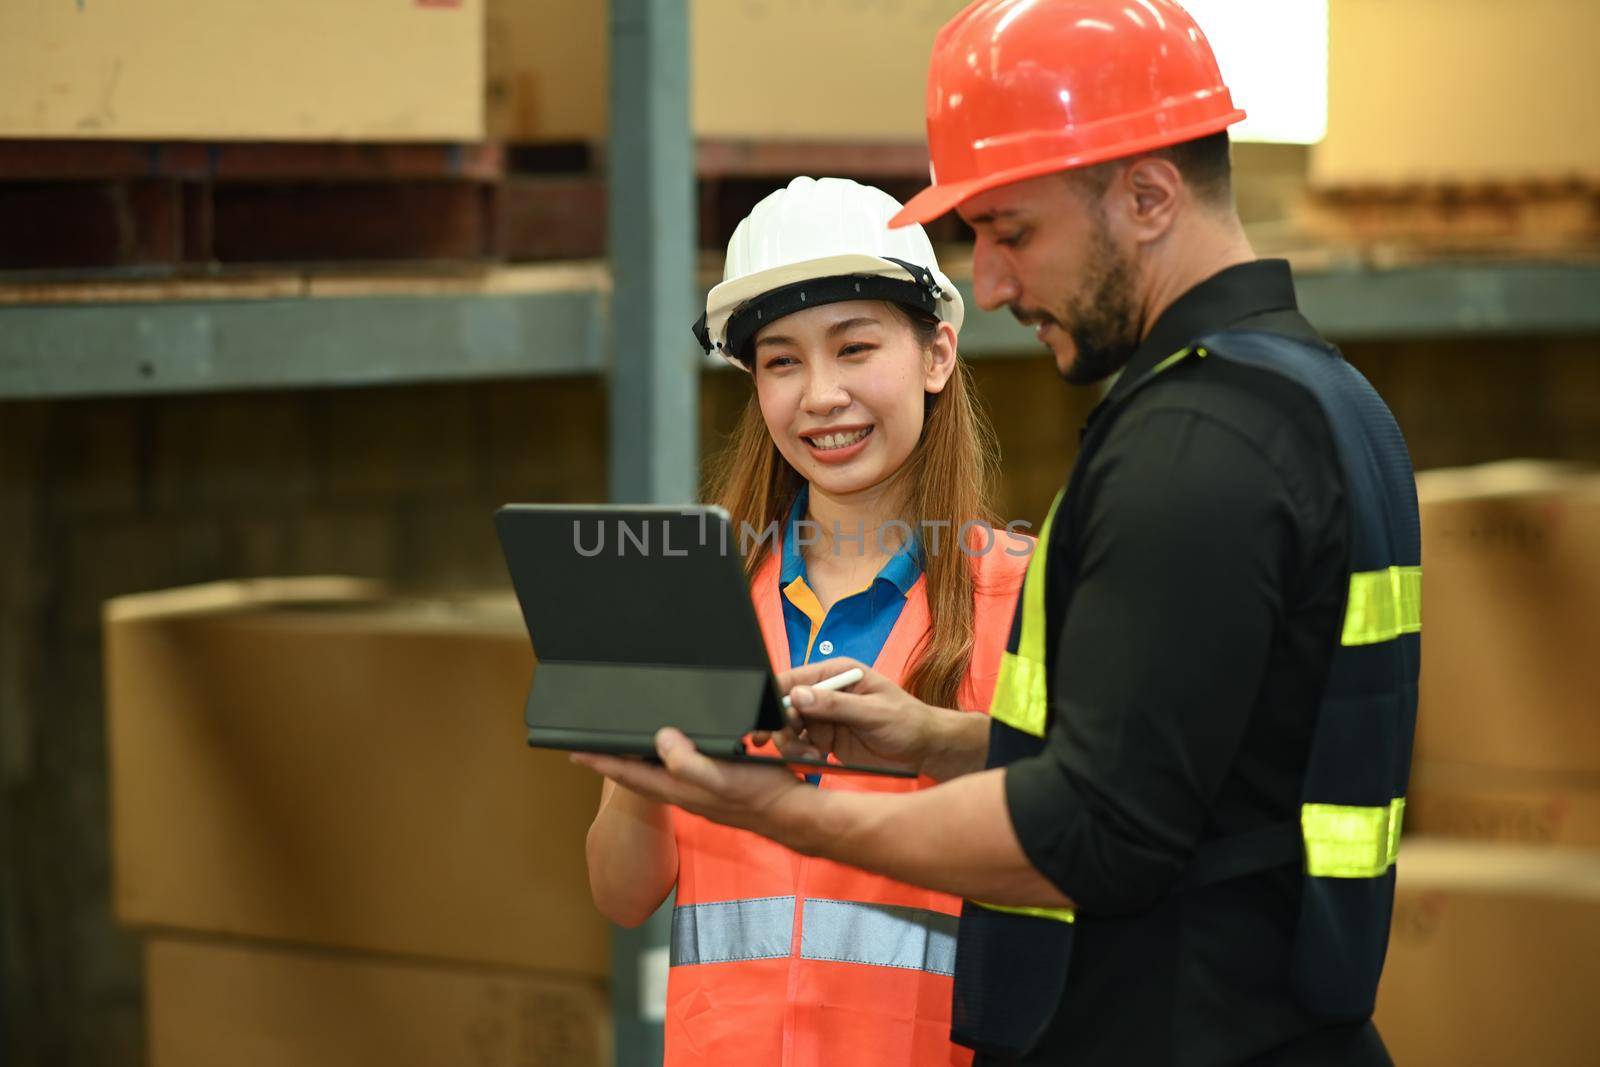 Male manager and warehouse worker inspecting stock tick and cardboard stock product on digital tablet in a large warehouse.